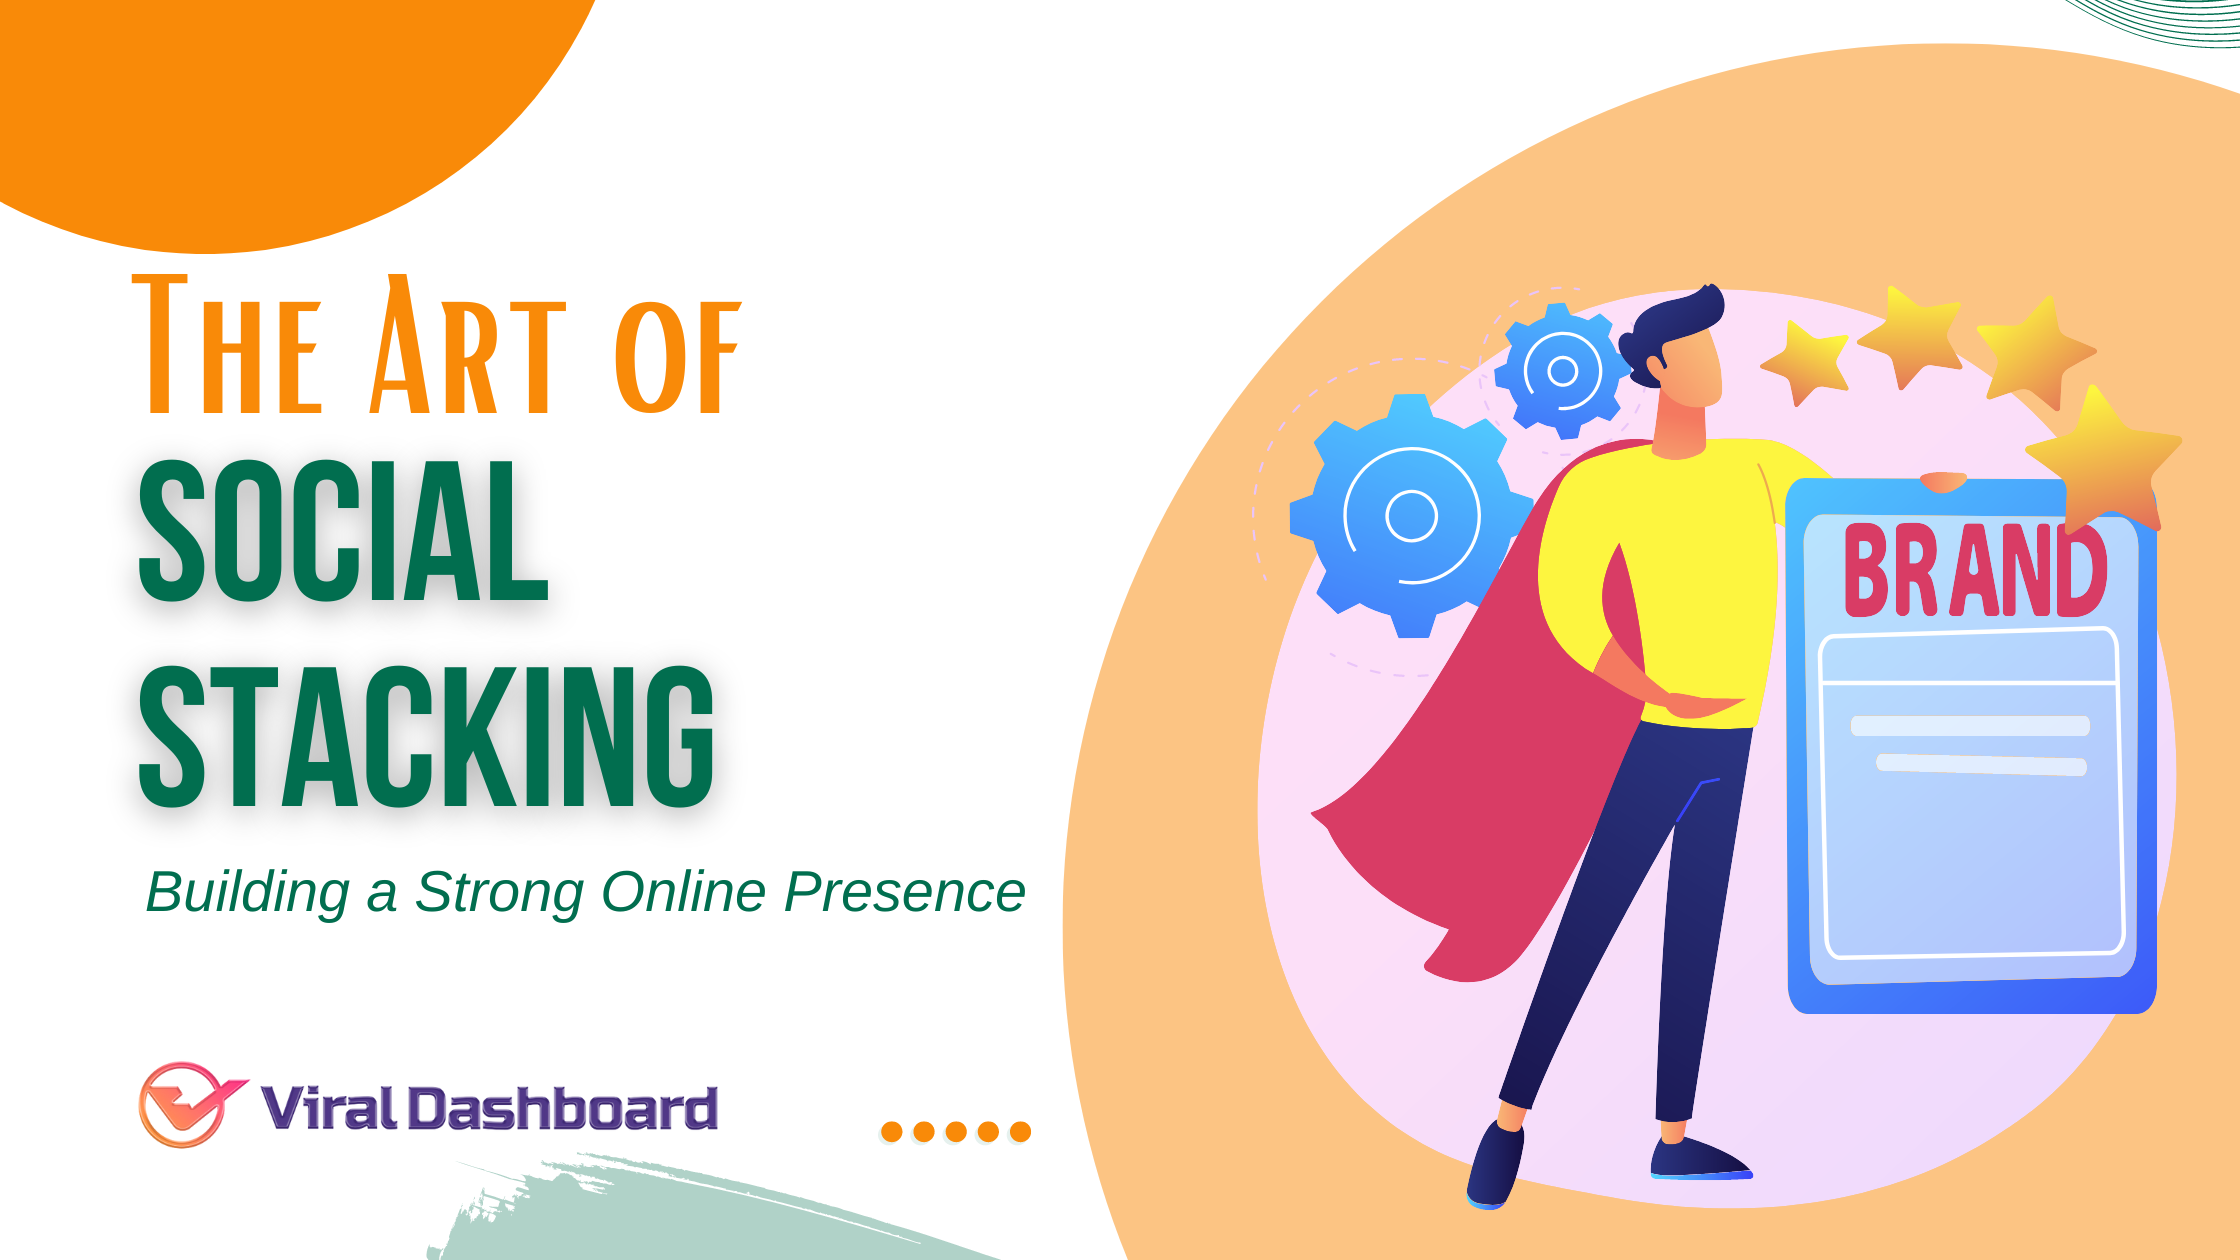 The Art of Social Stacking: Building a Strong Online Presence